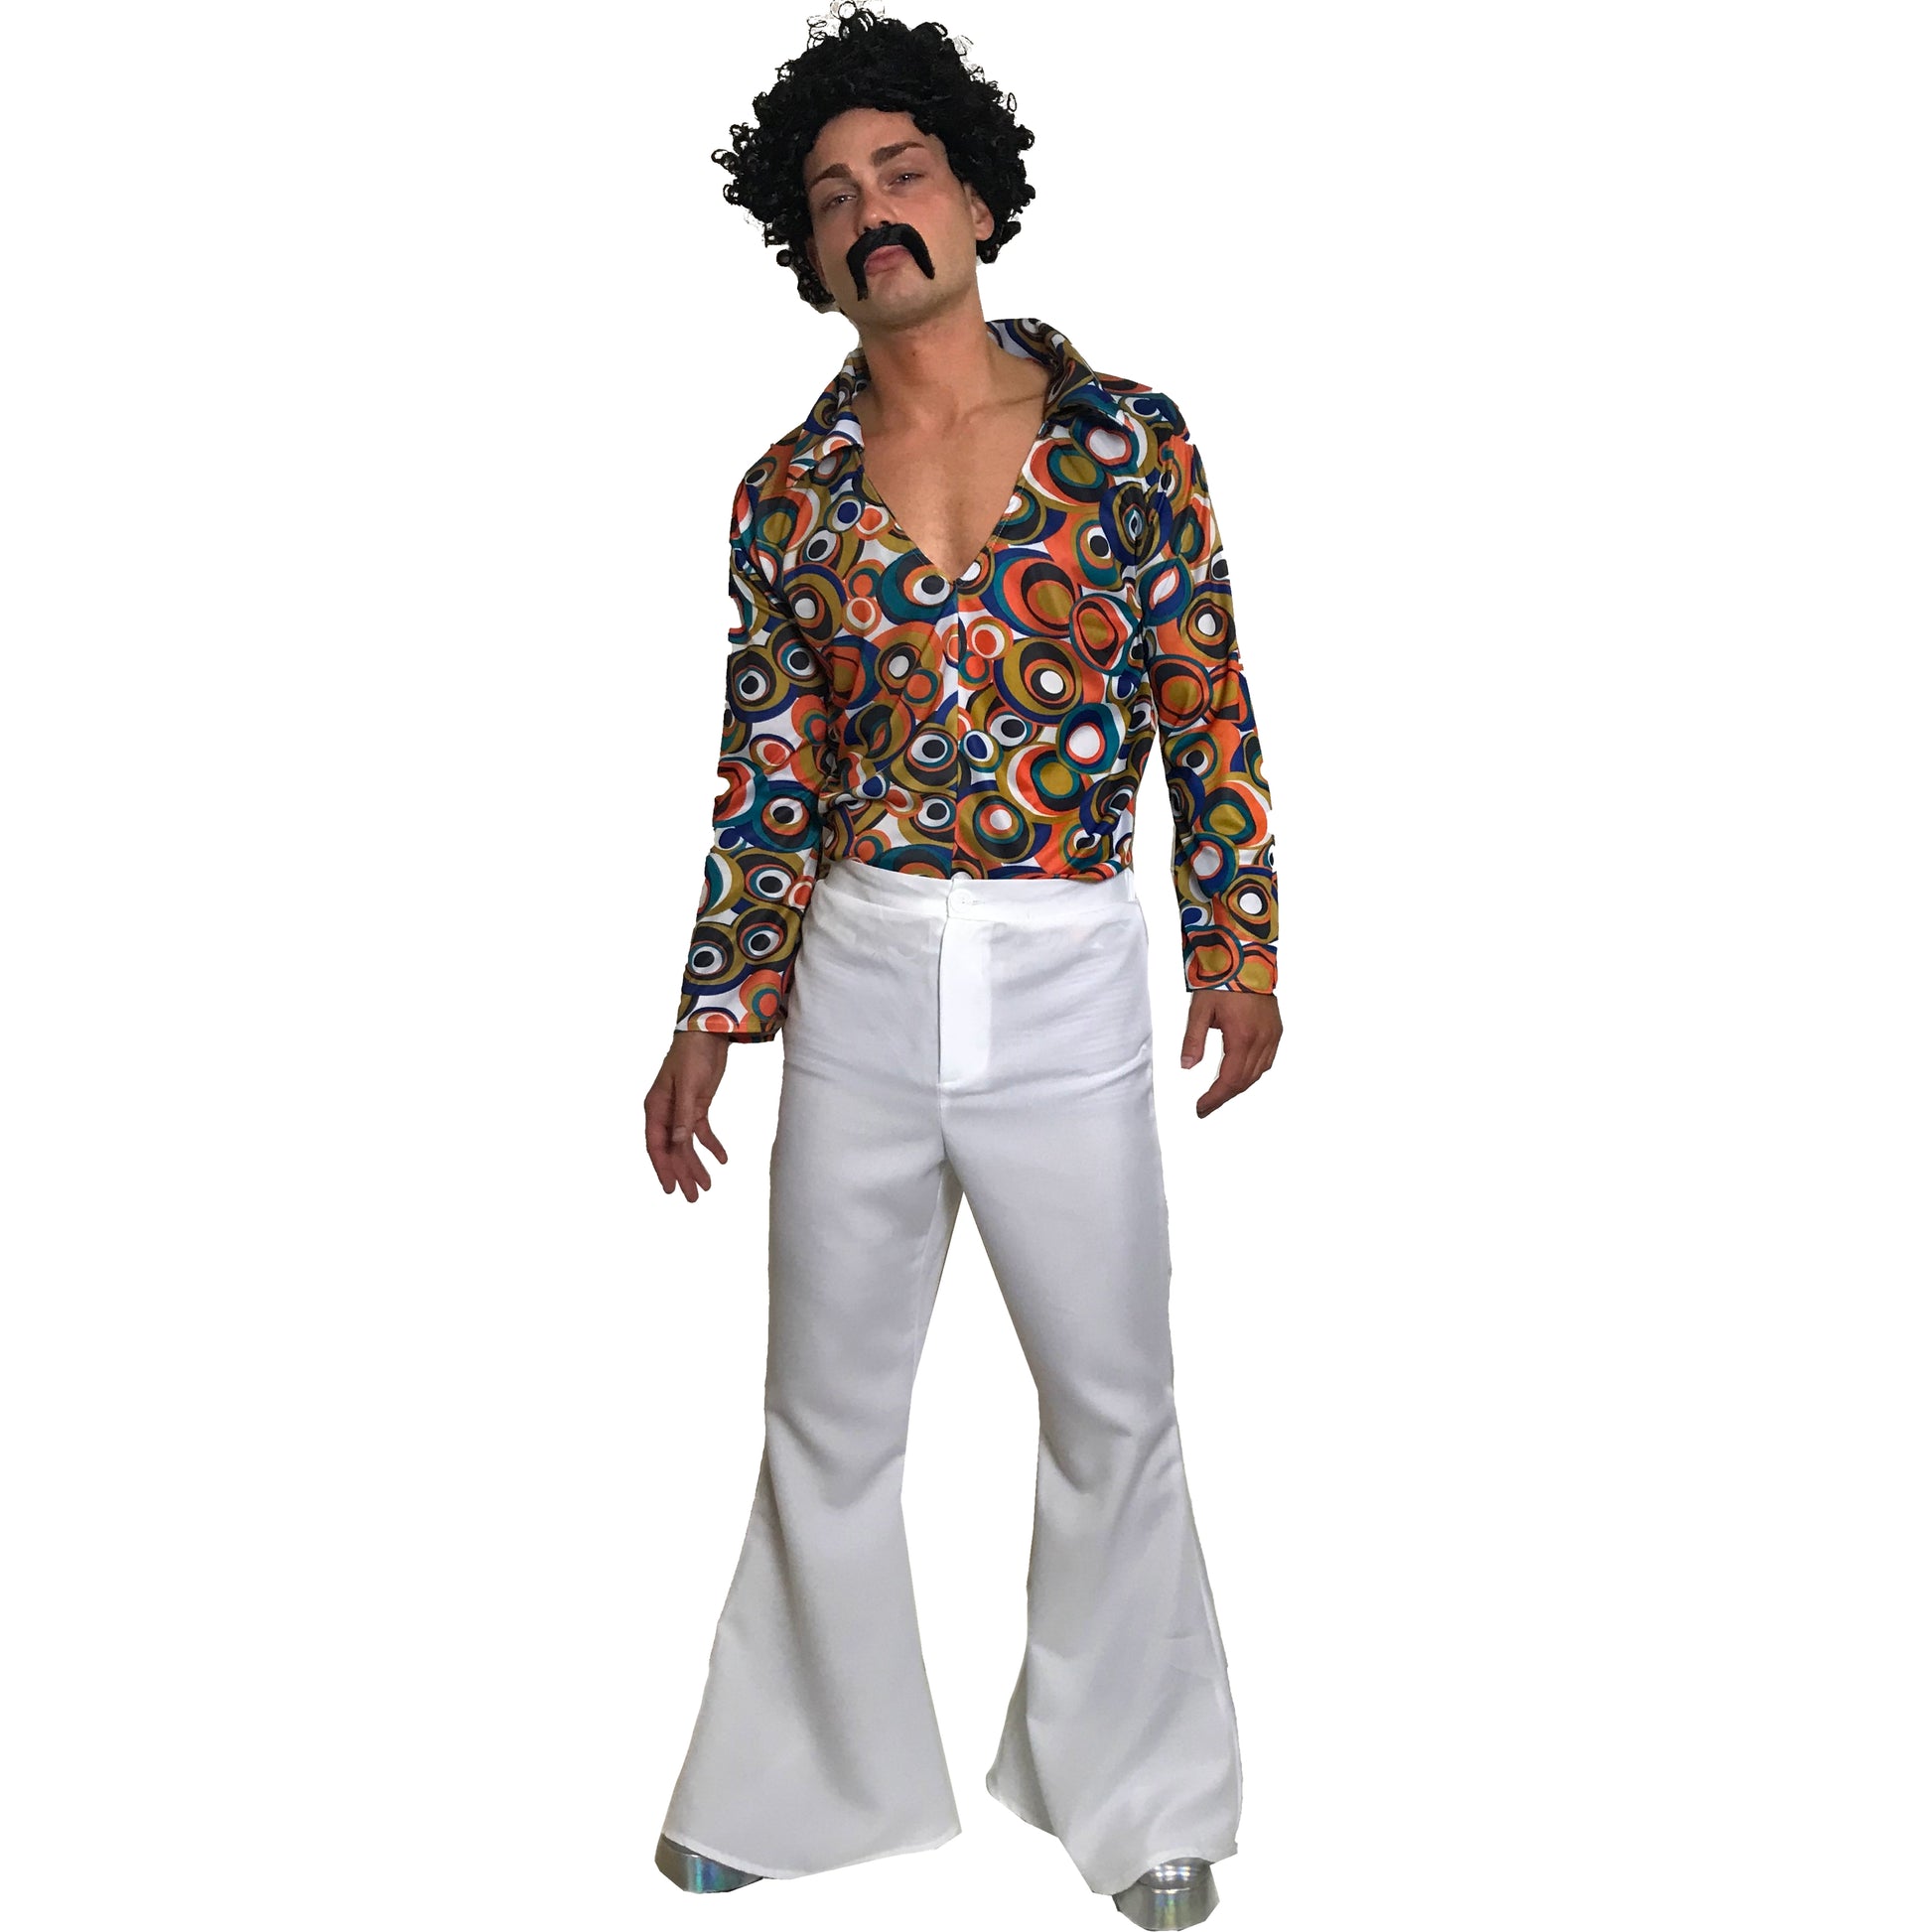 white flares-60s 70s party-fancy dress costume.jpg